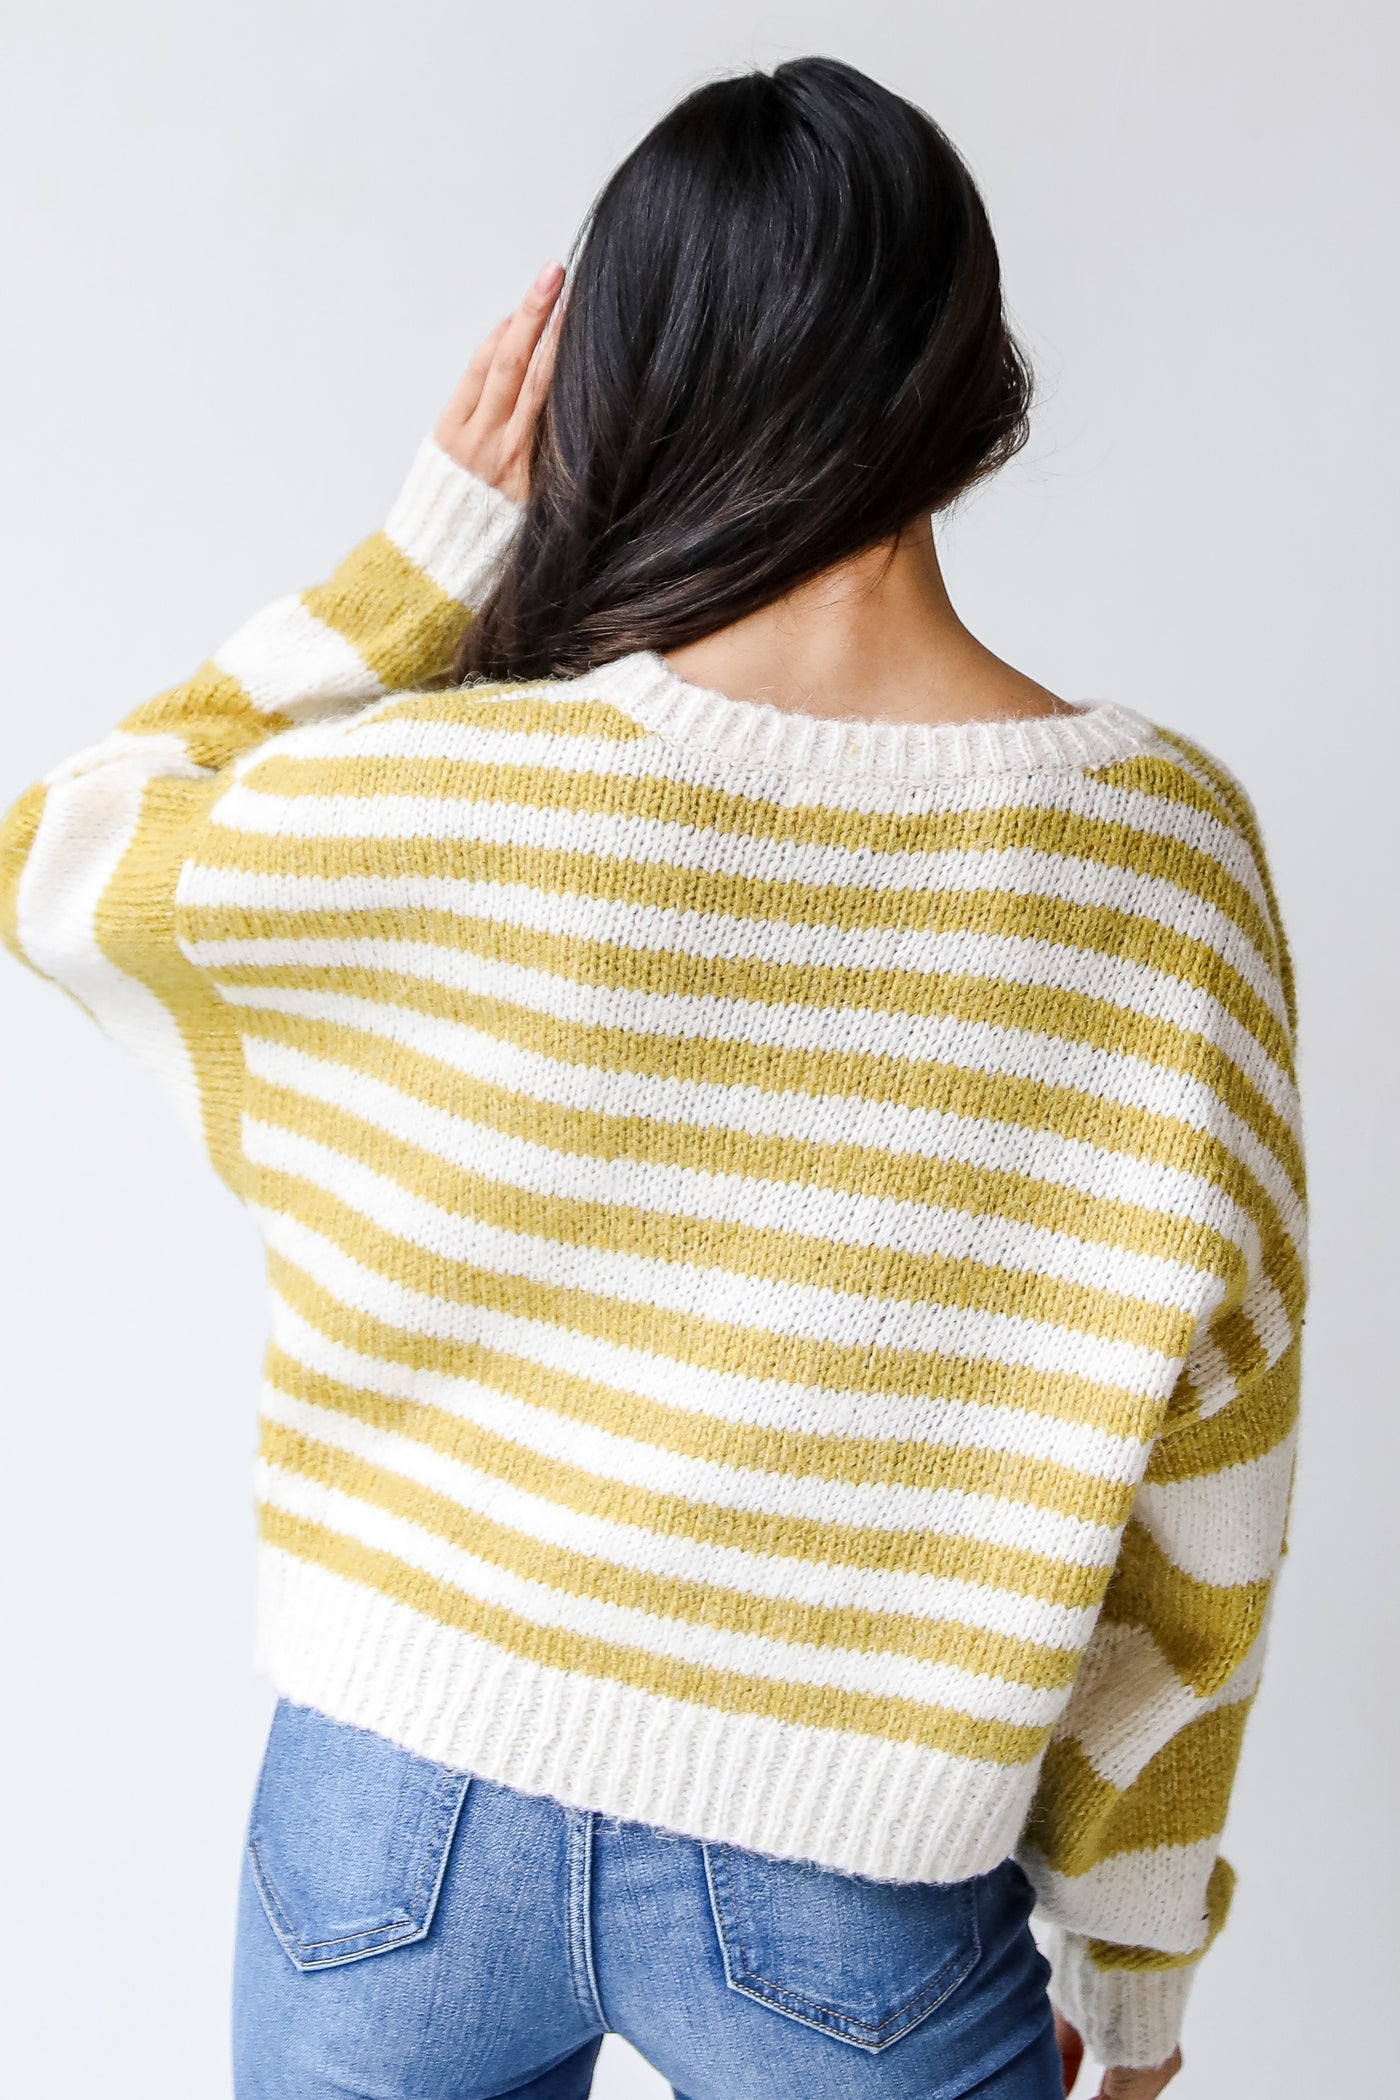 Striped Sweater in mustard back view